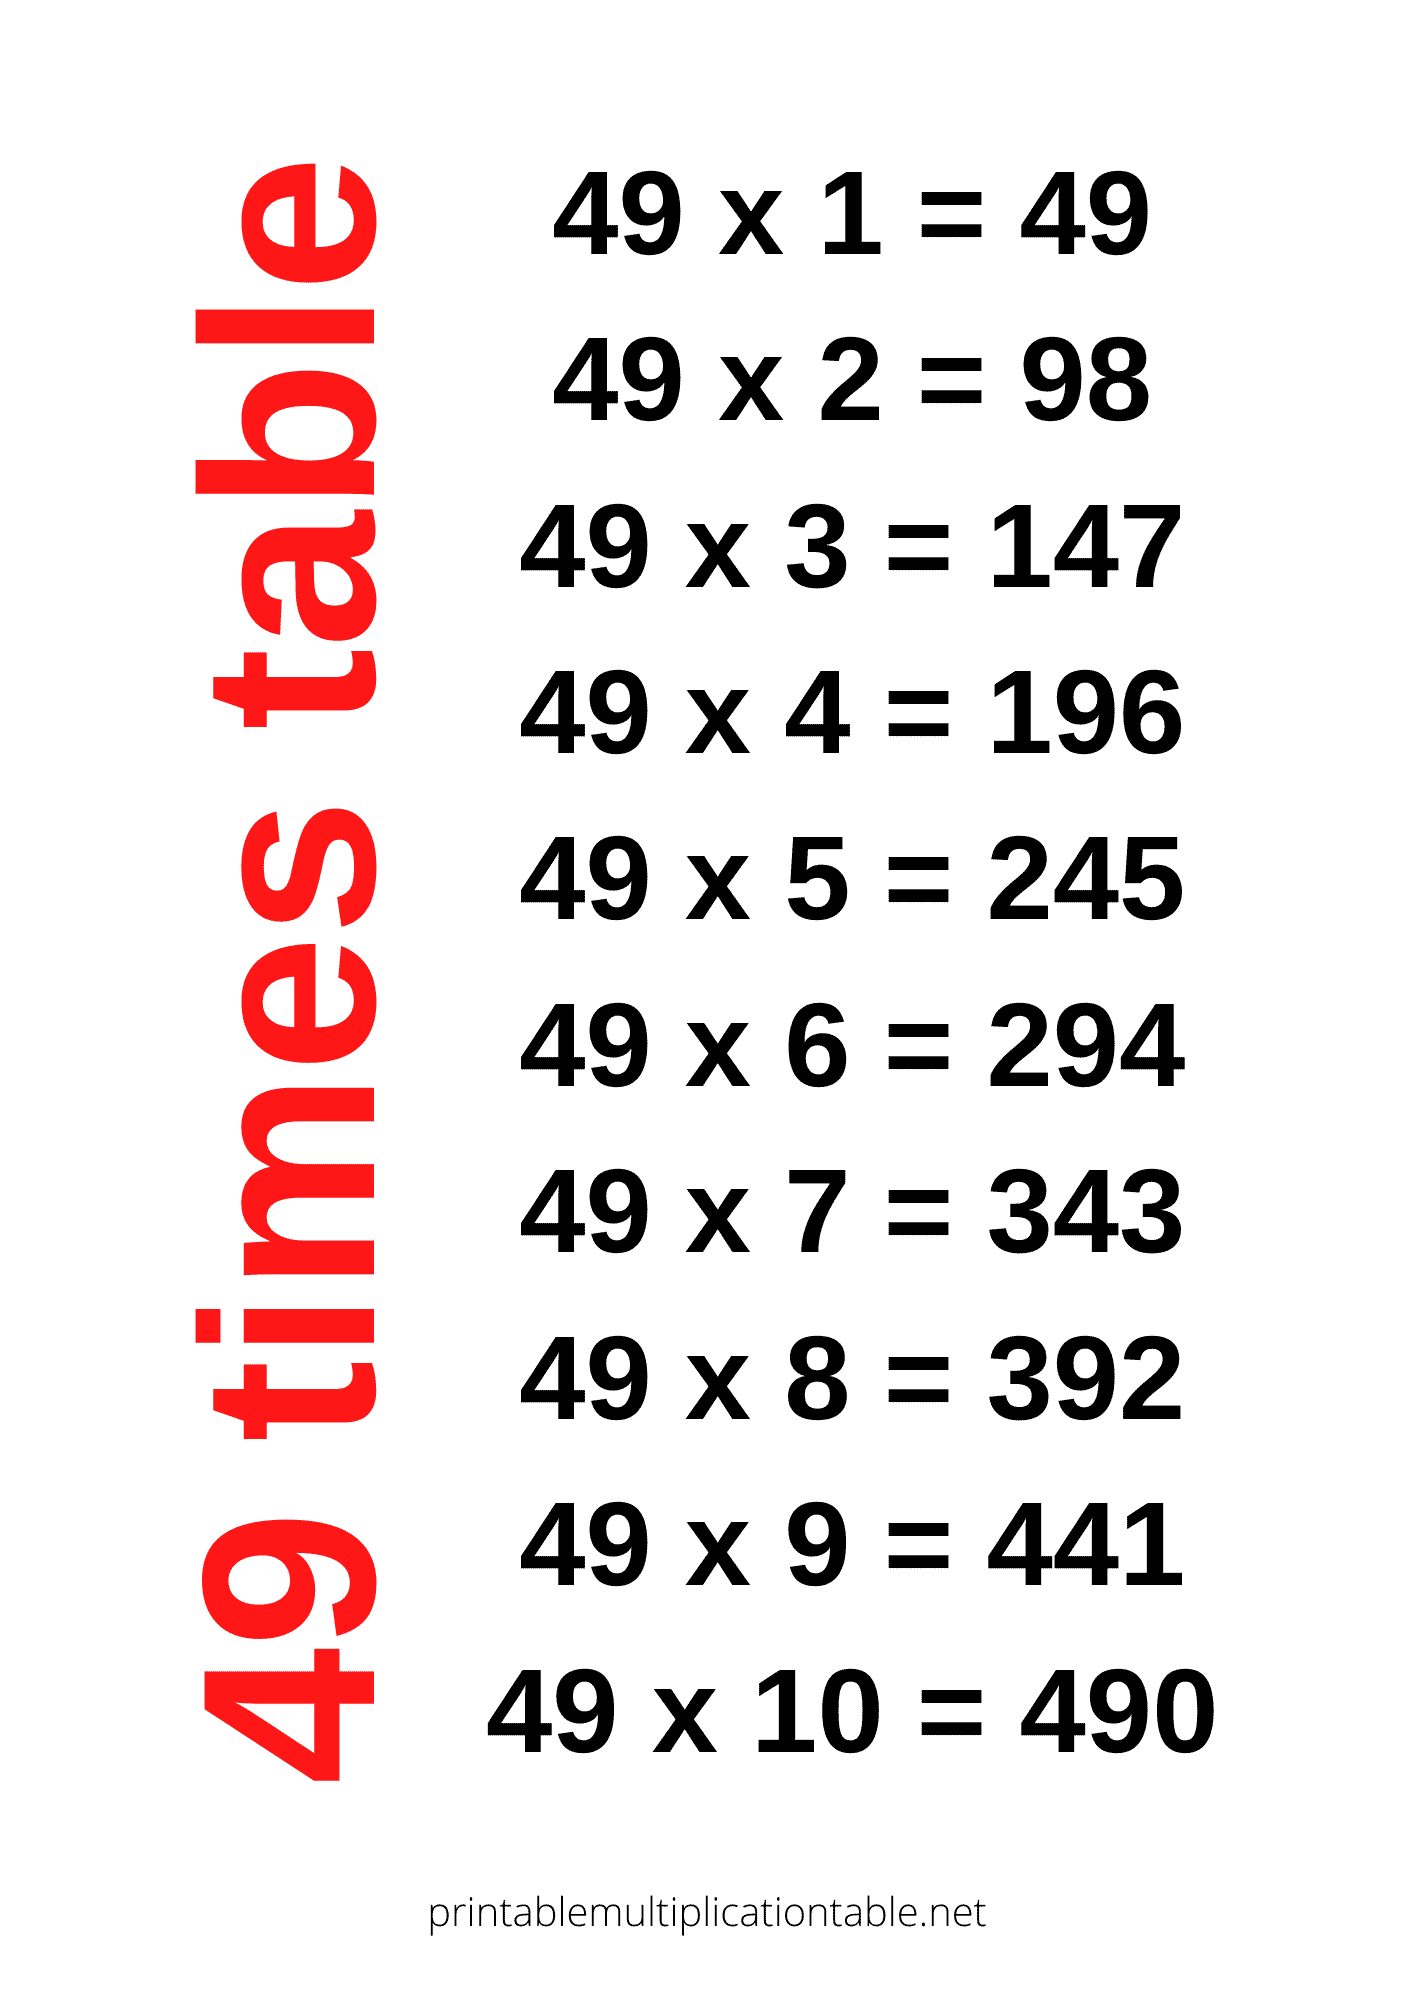 49 times table chart